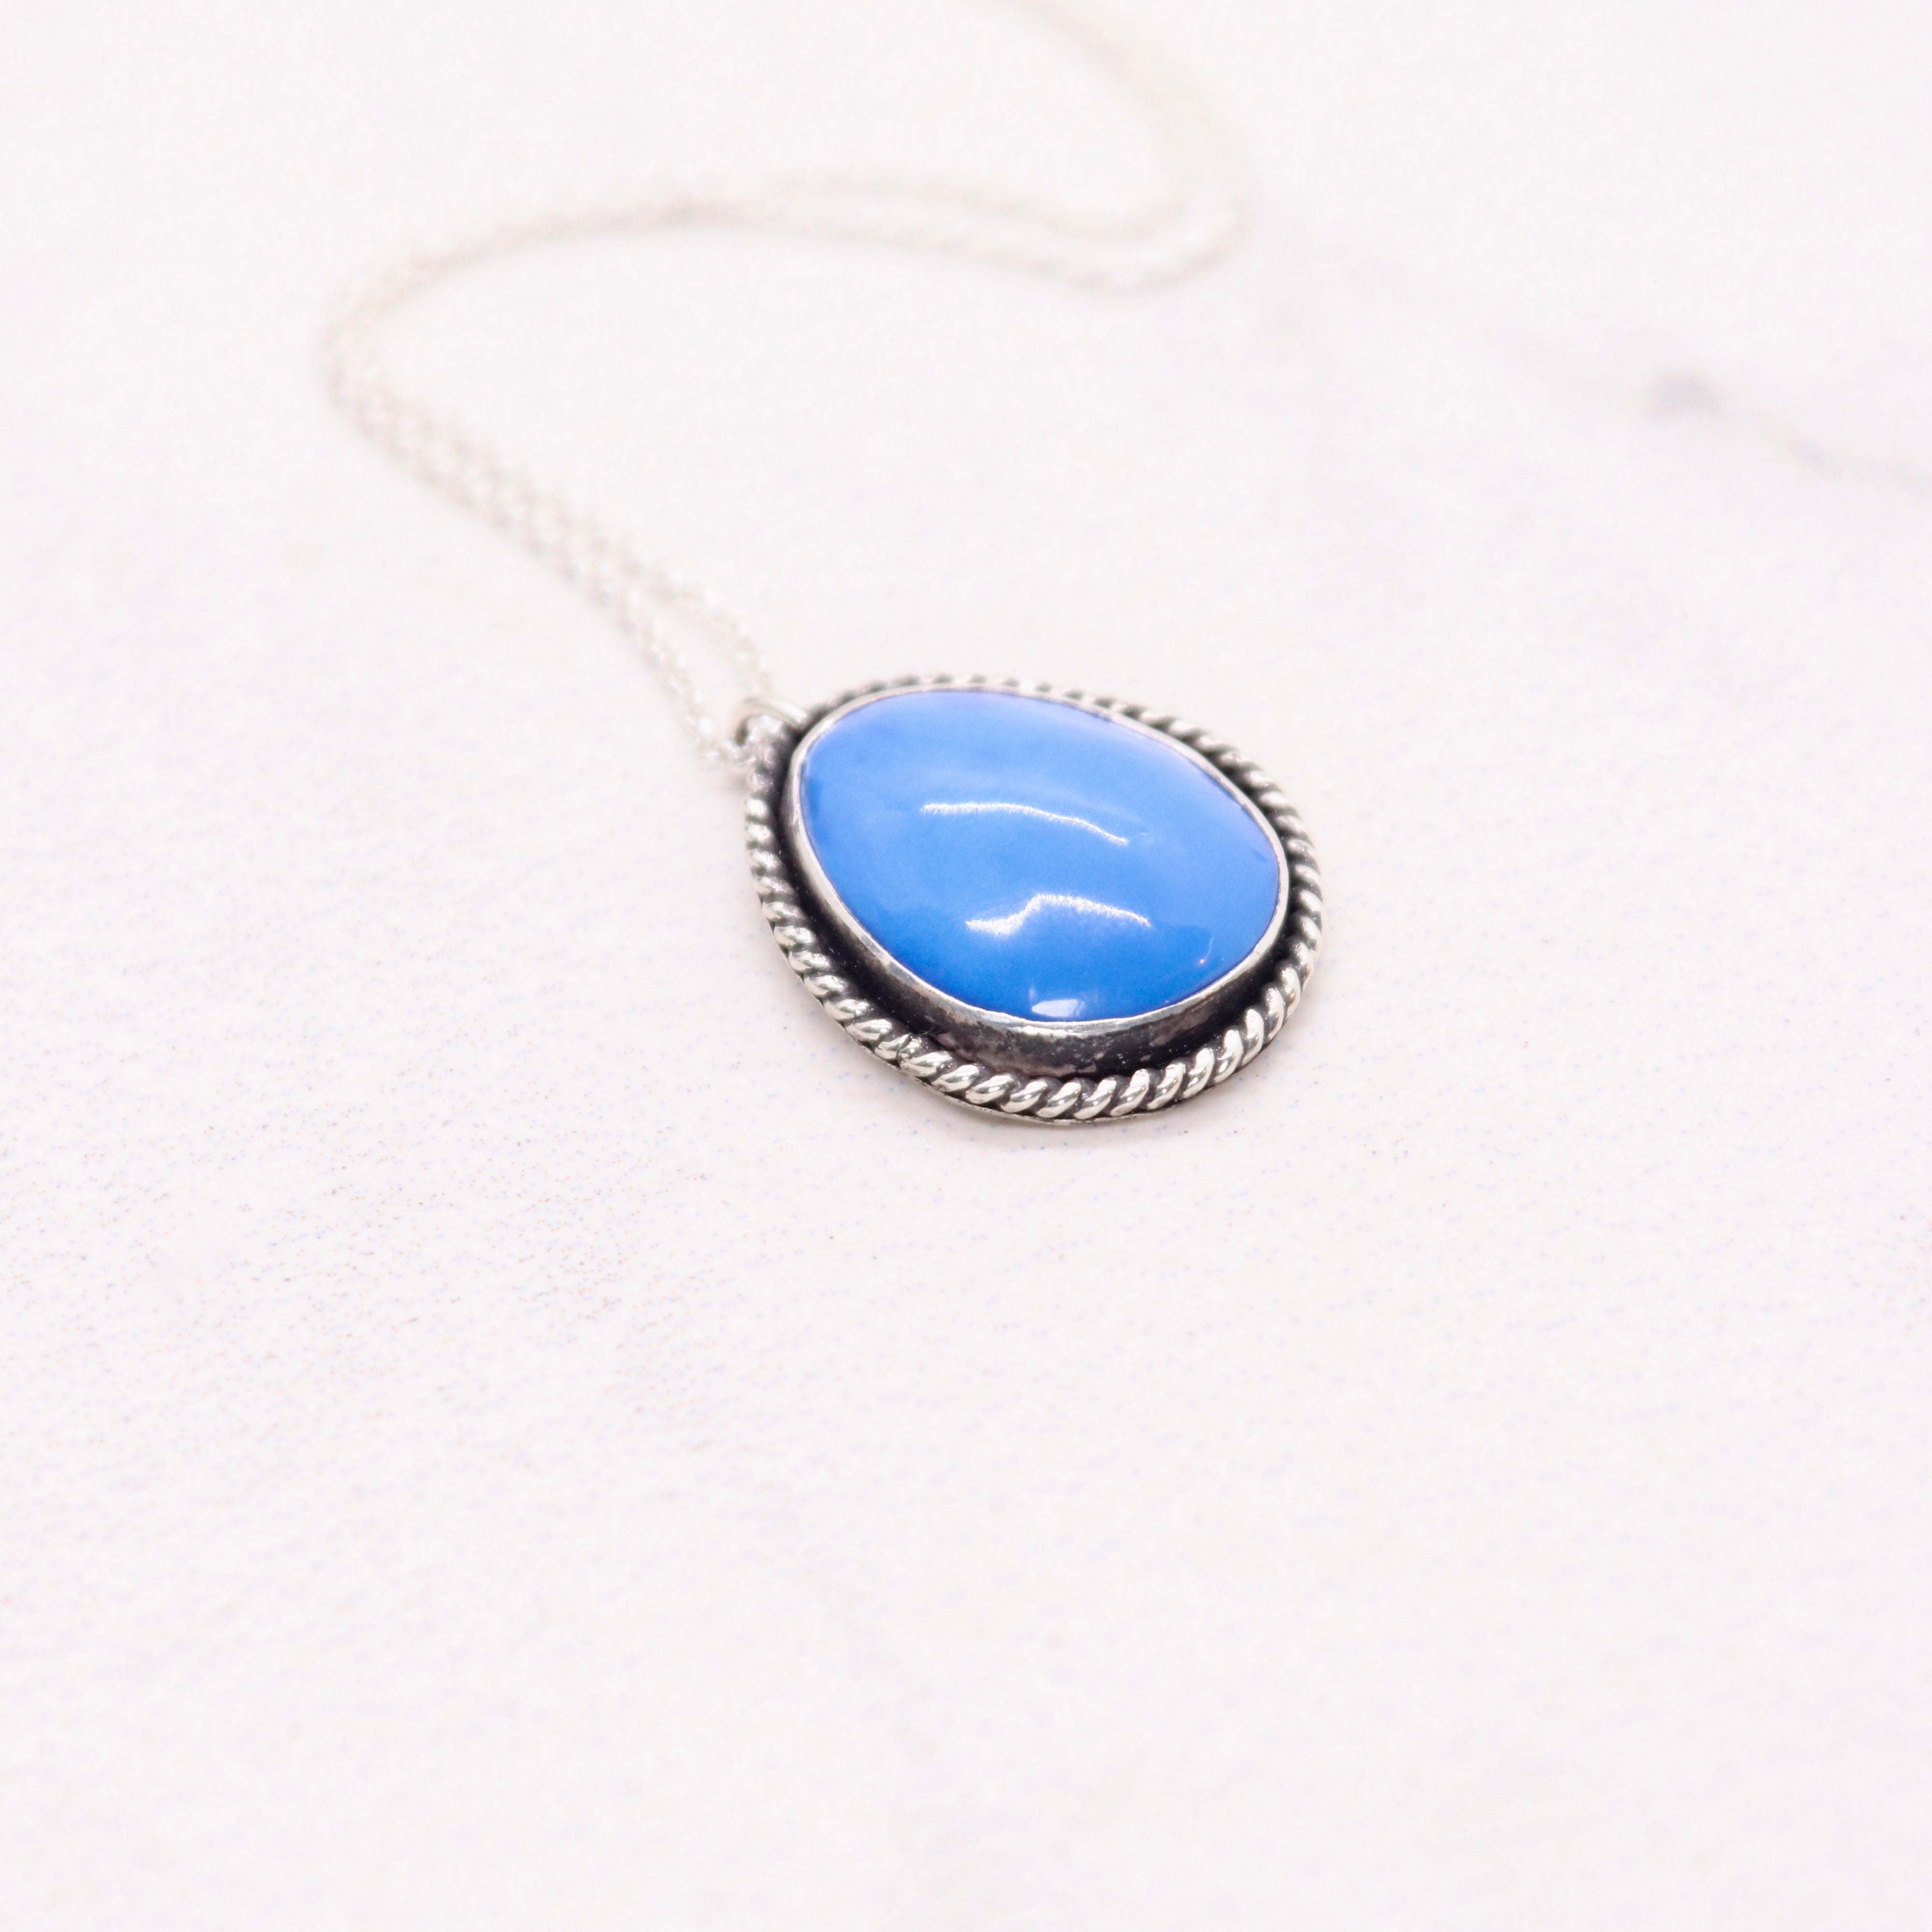 Ceruleite pendant necklace in sterling silver with a boho style